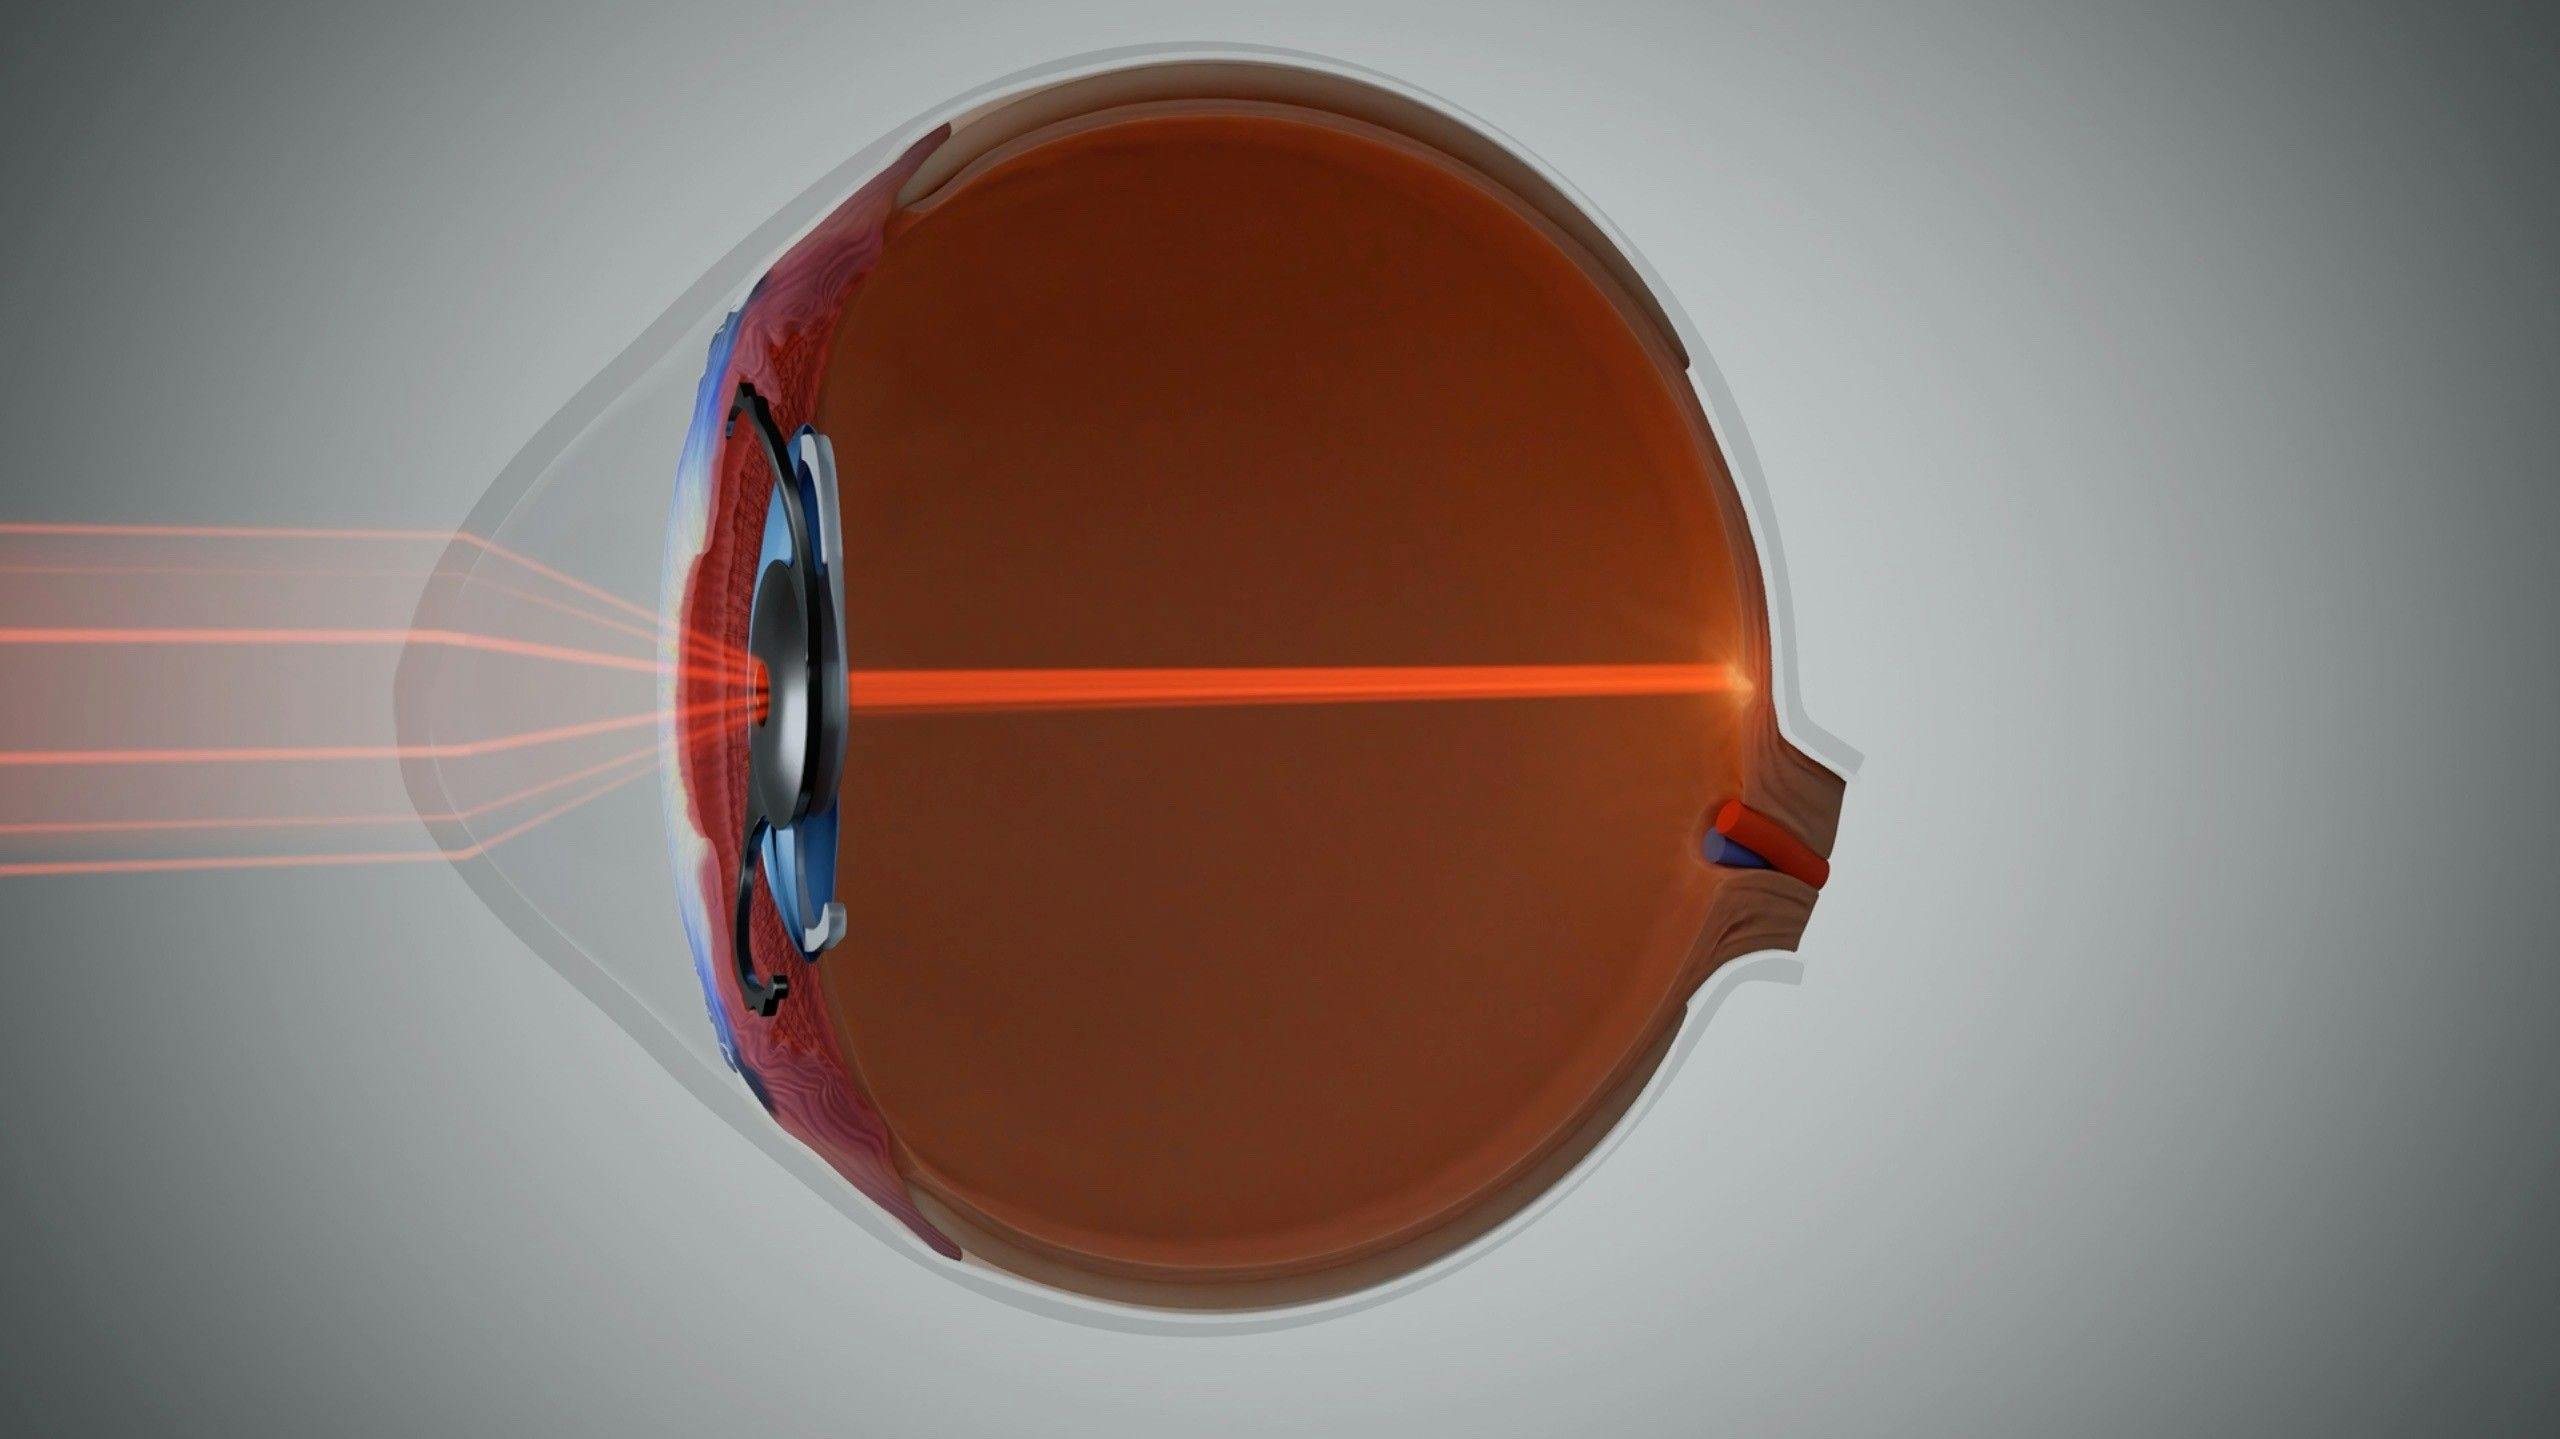 New IOLs for keratoconus and other aberrated corneas